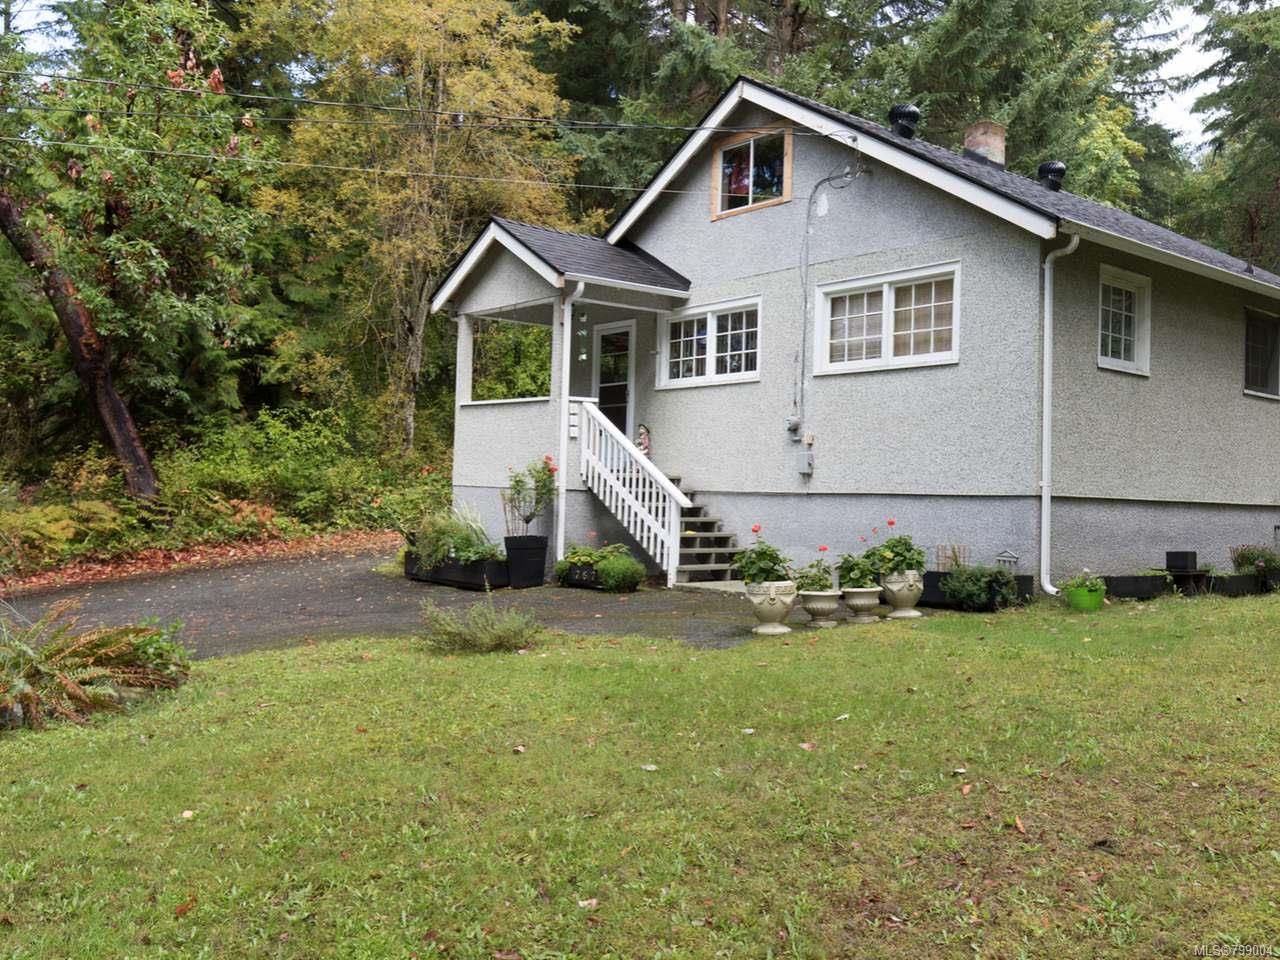 Main Photo: 2625 Northwest Bay Rd in NANOOSE BAY: PQ Nanoose House for sale (Parksville/Qualicum)  : MLS®# 799004